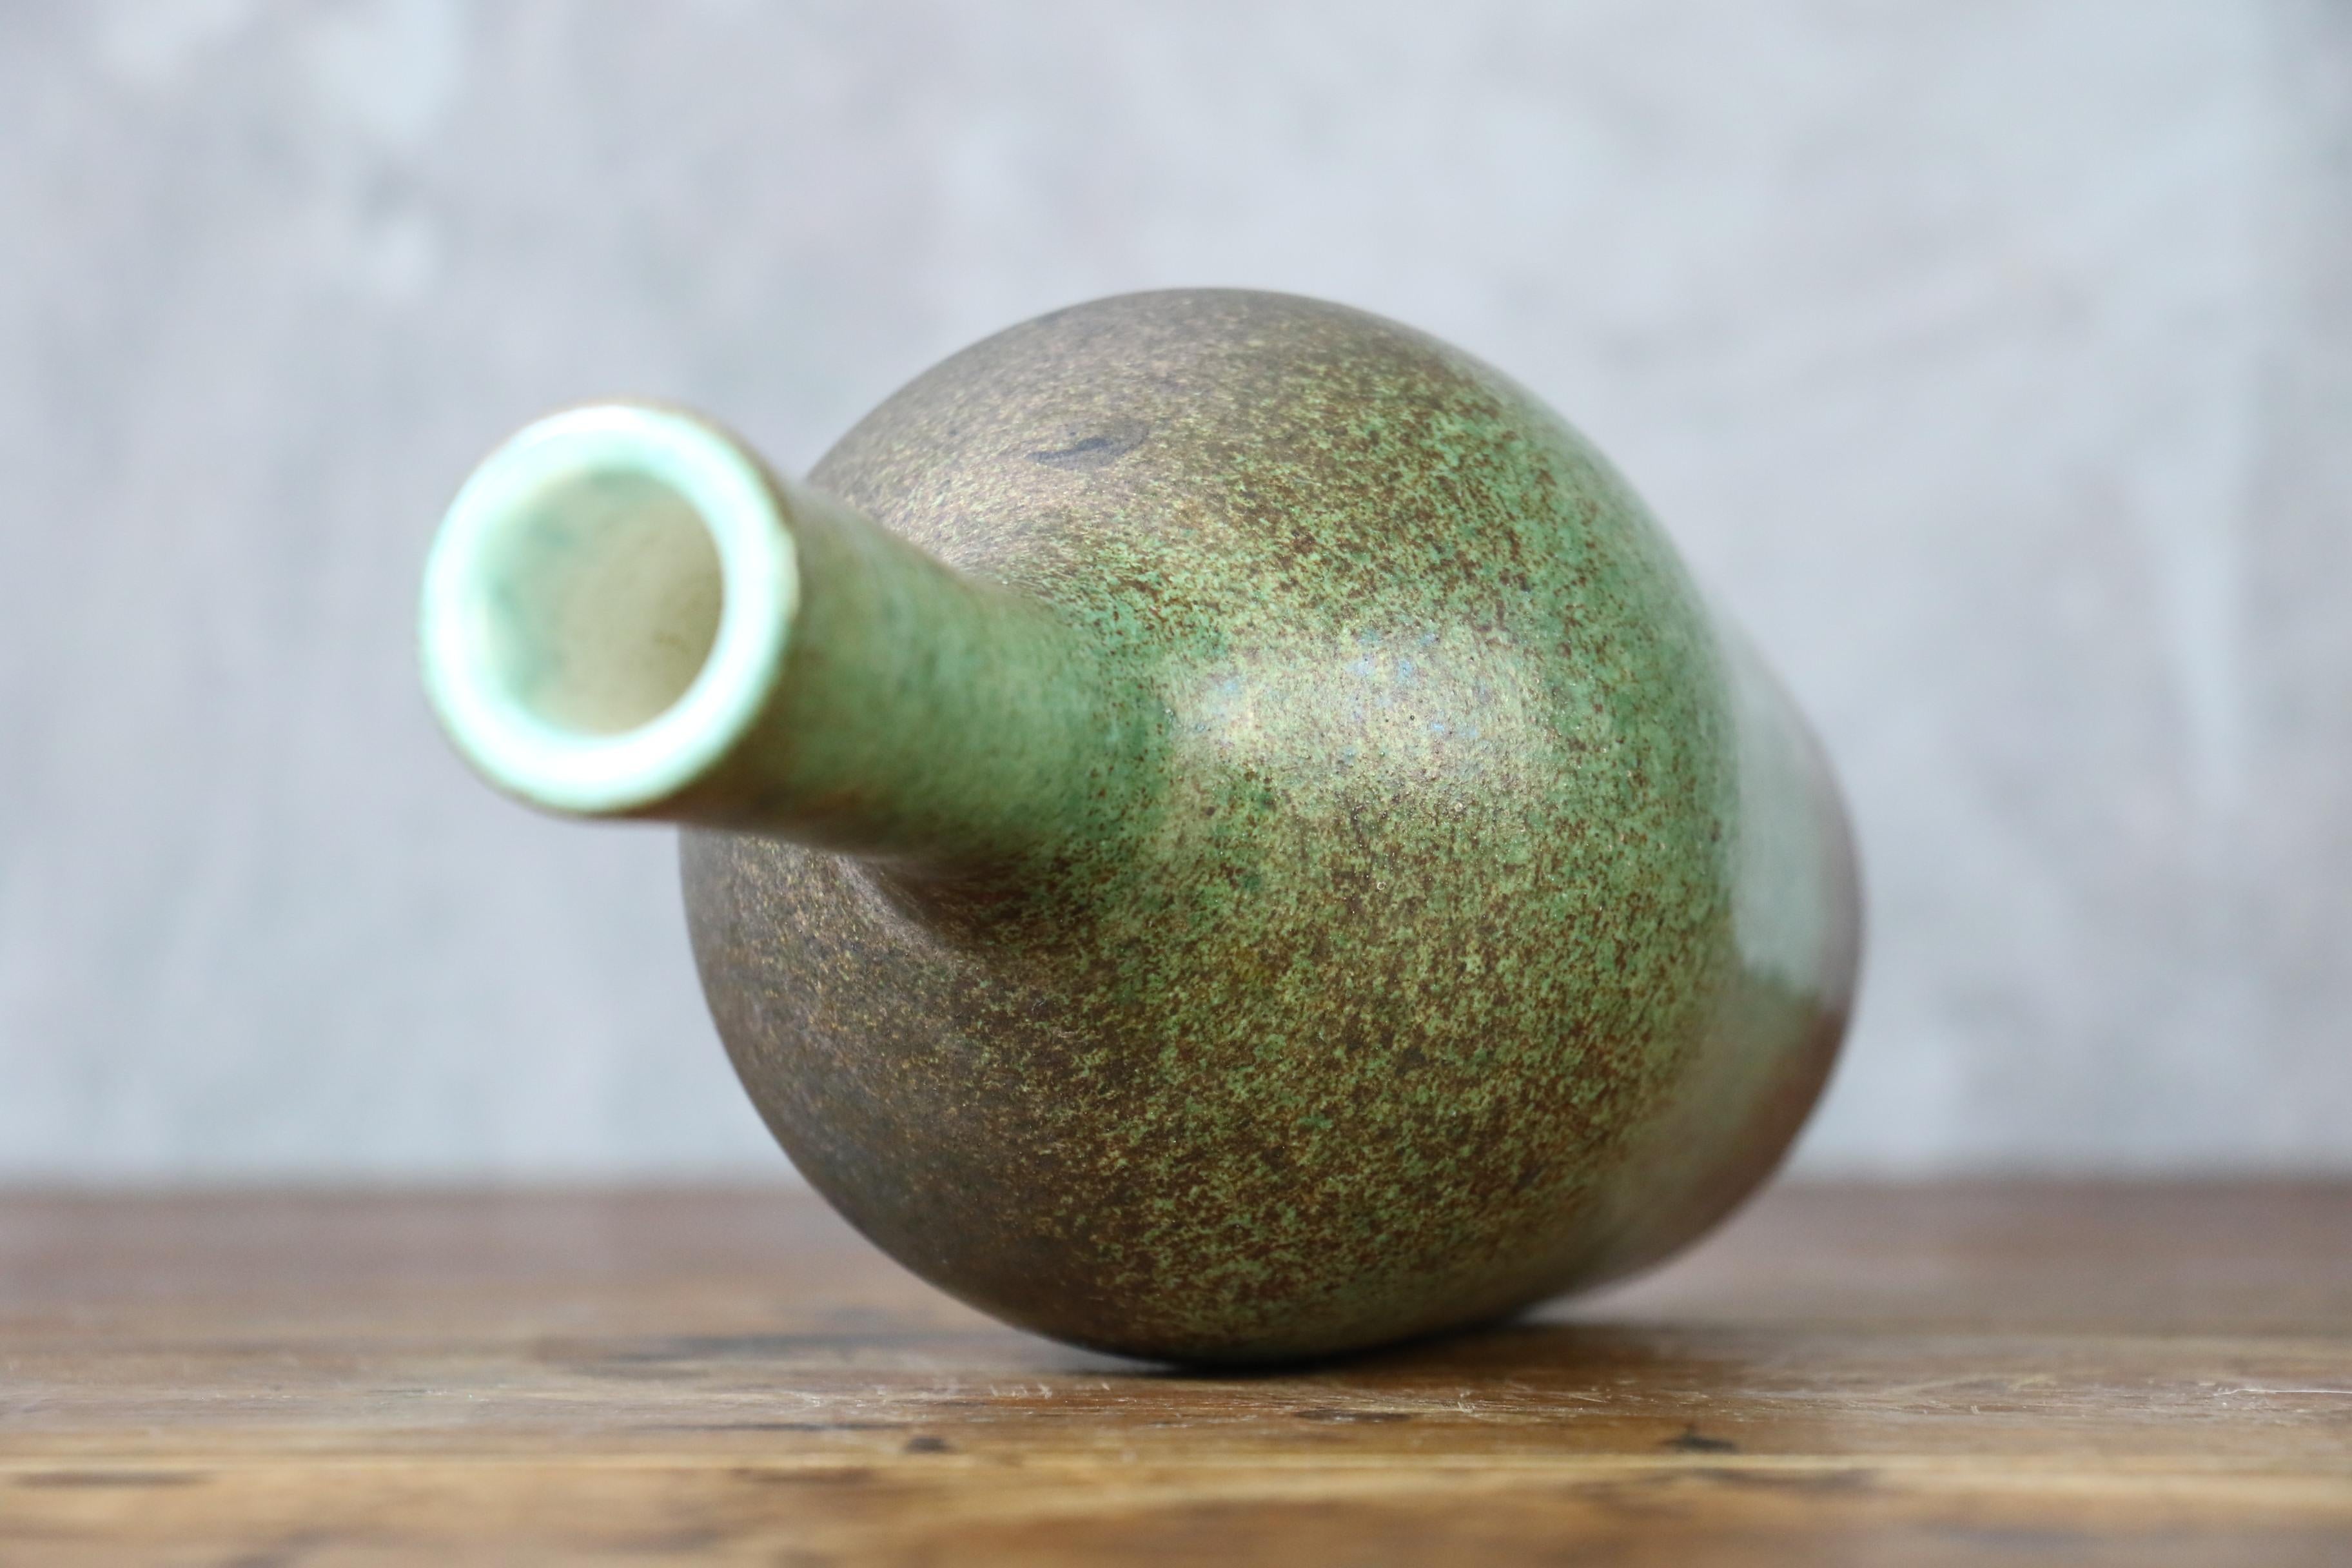 Robert Chiazzo, green ceramic vase, 1960, Bormes, Vallauris, Era Jouve, Picault

Beautiful free-form ceramic vase by French artist Robert Chiazzo.

In the last pictures, you can see other ceramics by the artist. Please contact me if you are